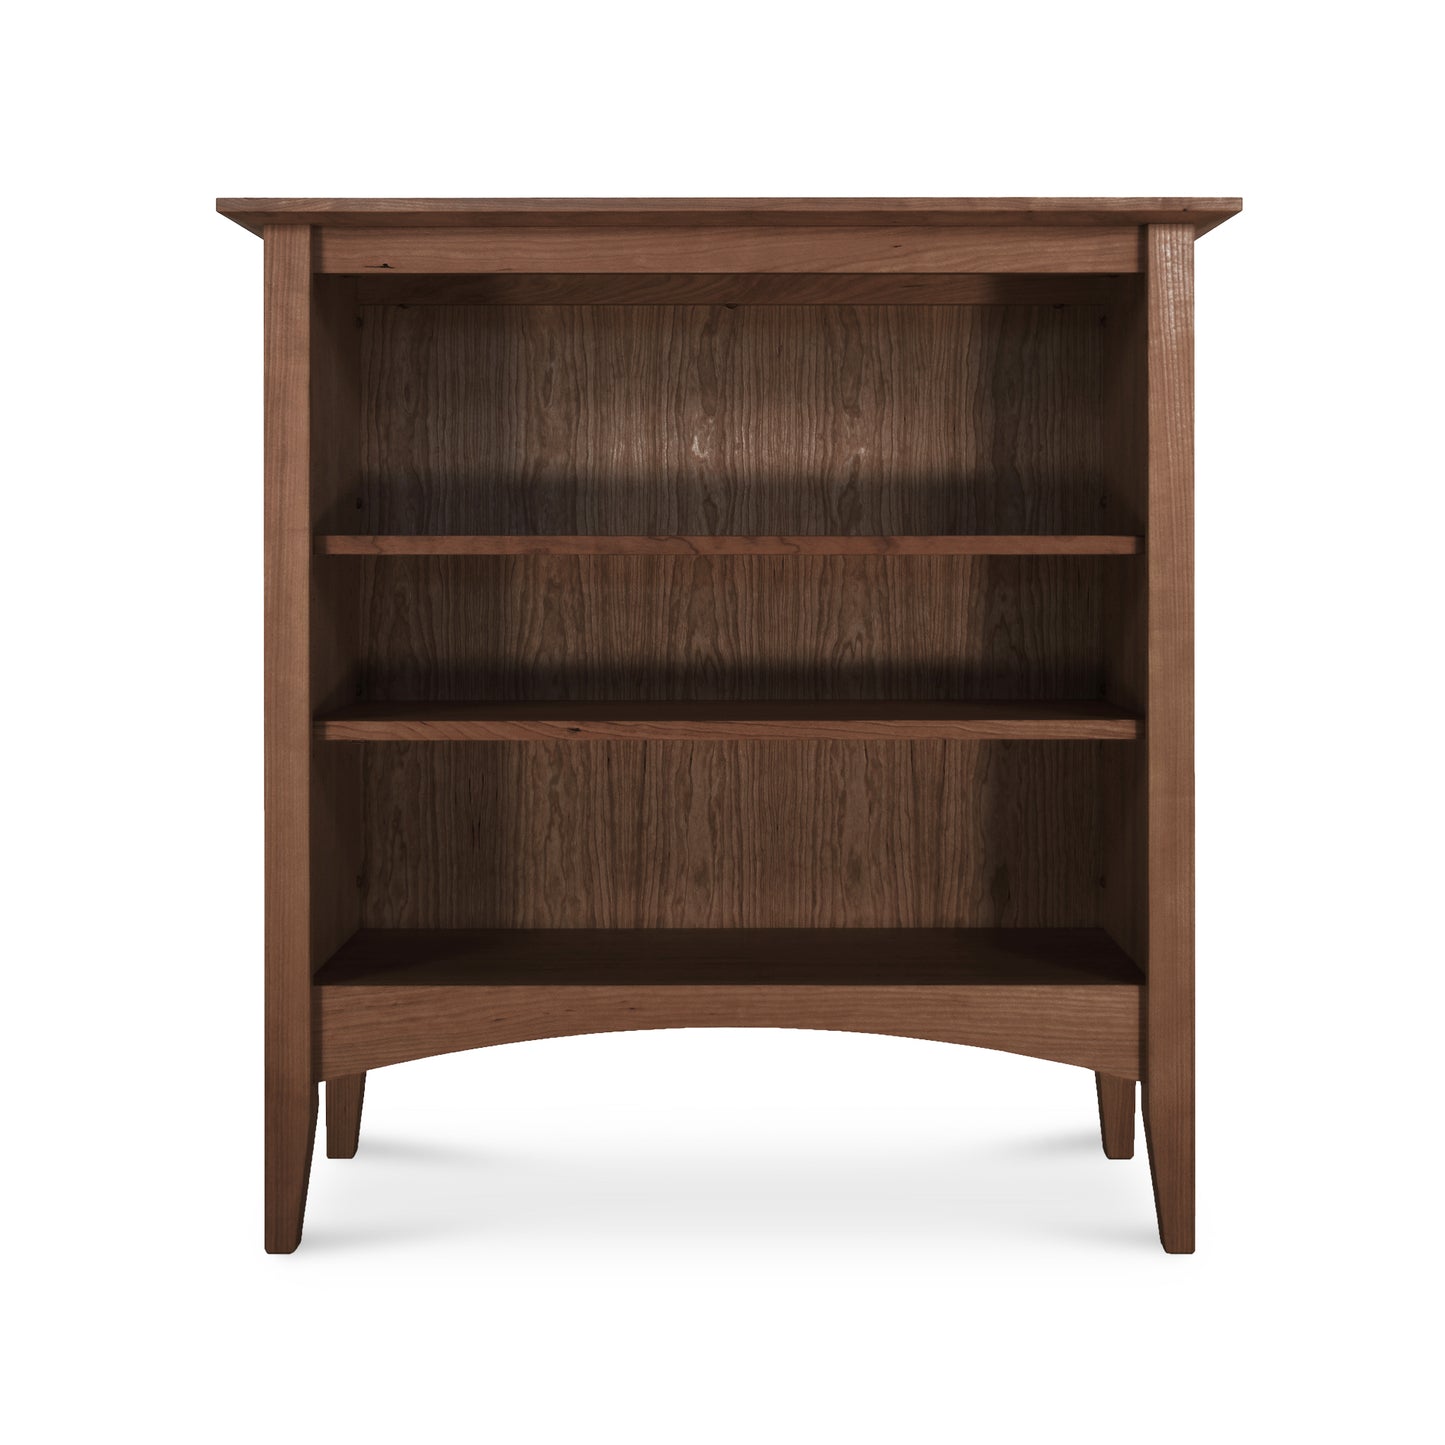 Maple Corner Woodworks American Shaker Bookcase crafted from sustainably harvested hardwoods, with three shelves, isolated on a white background.